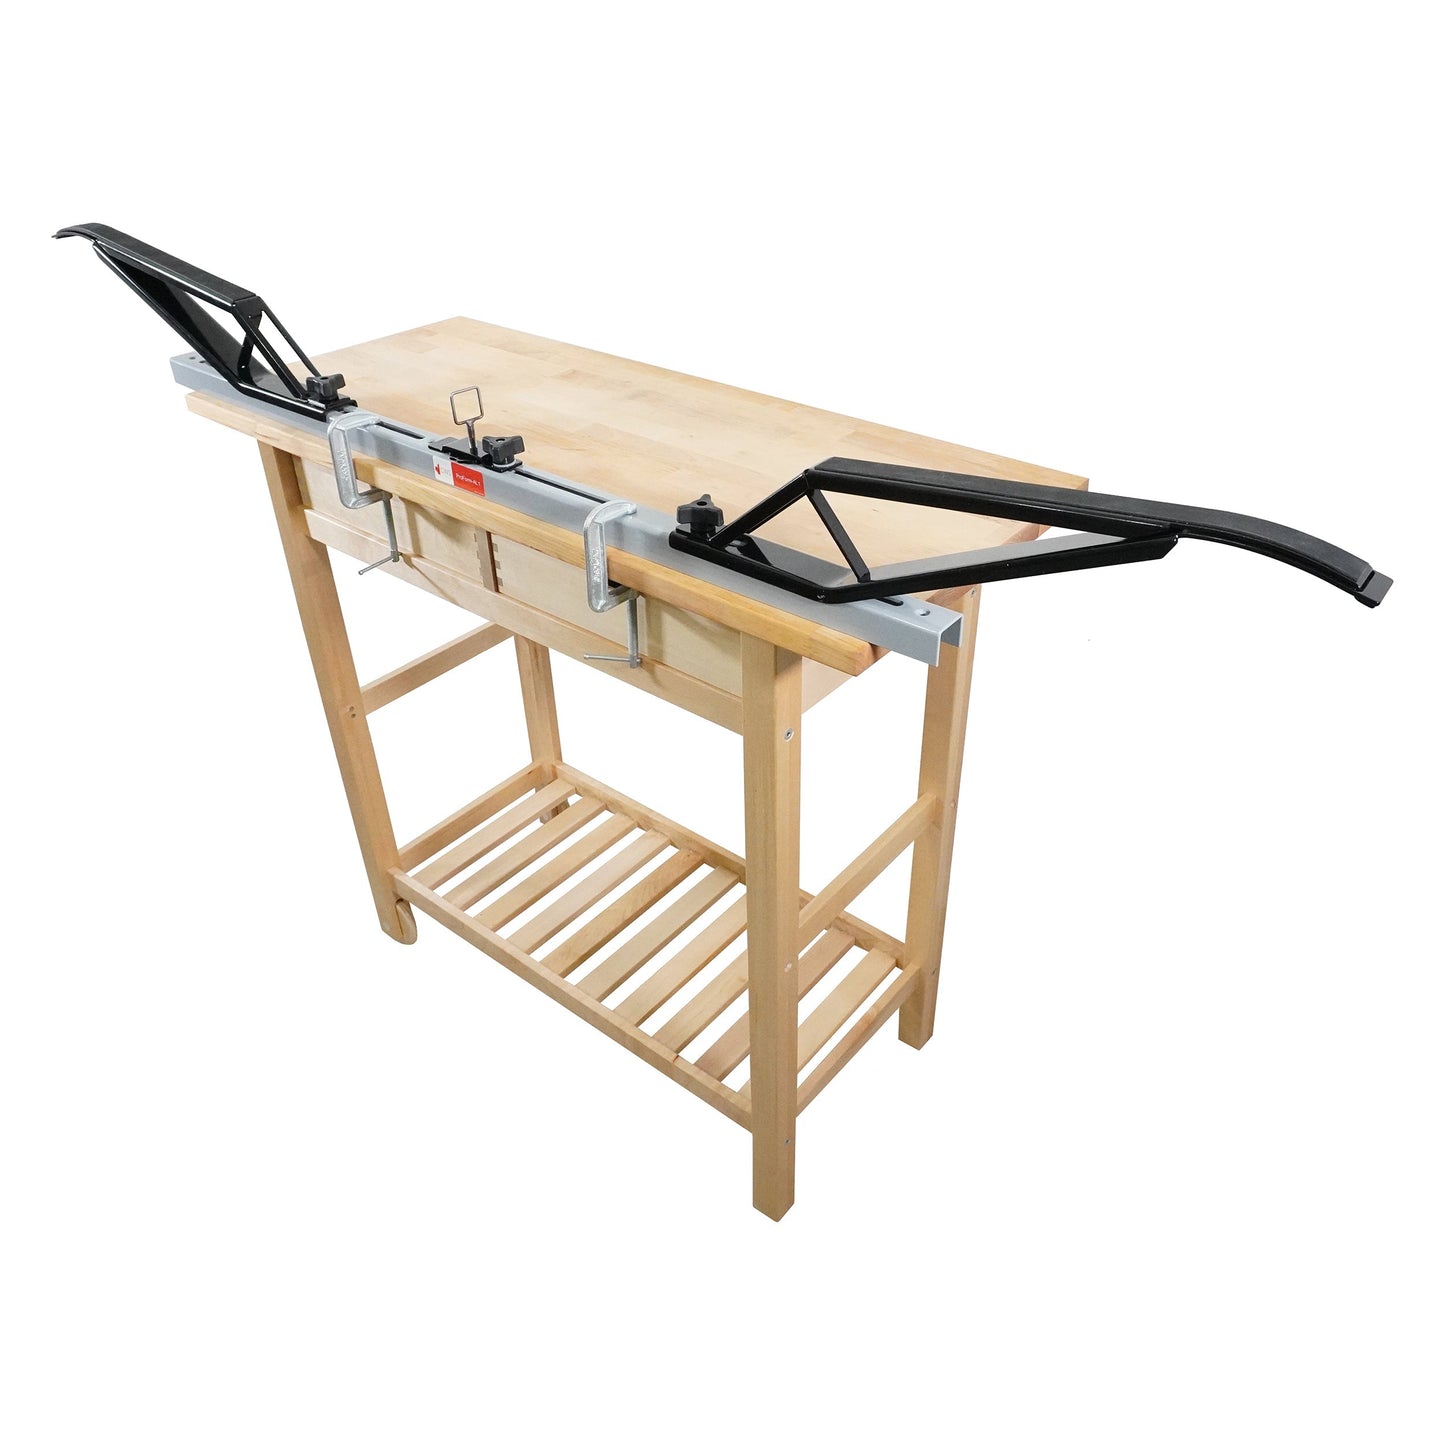 A product picture of the Canadian Wintersports Inc ProForm-AL1 Wax Bench Station Form Segment